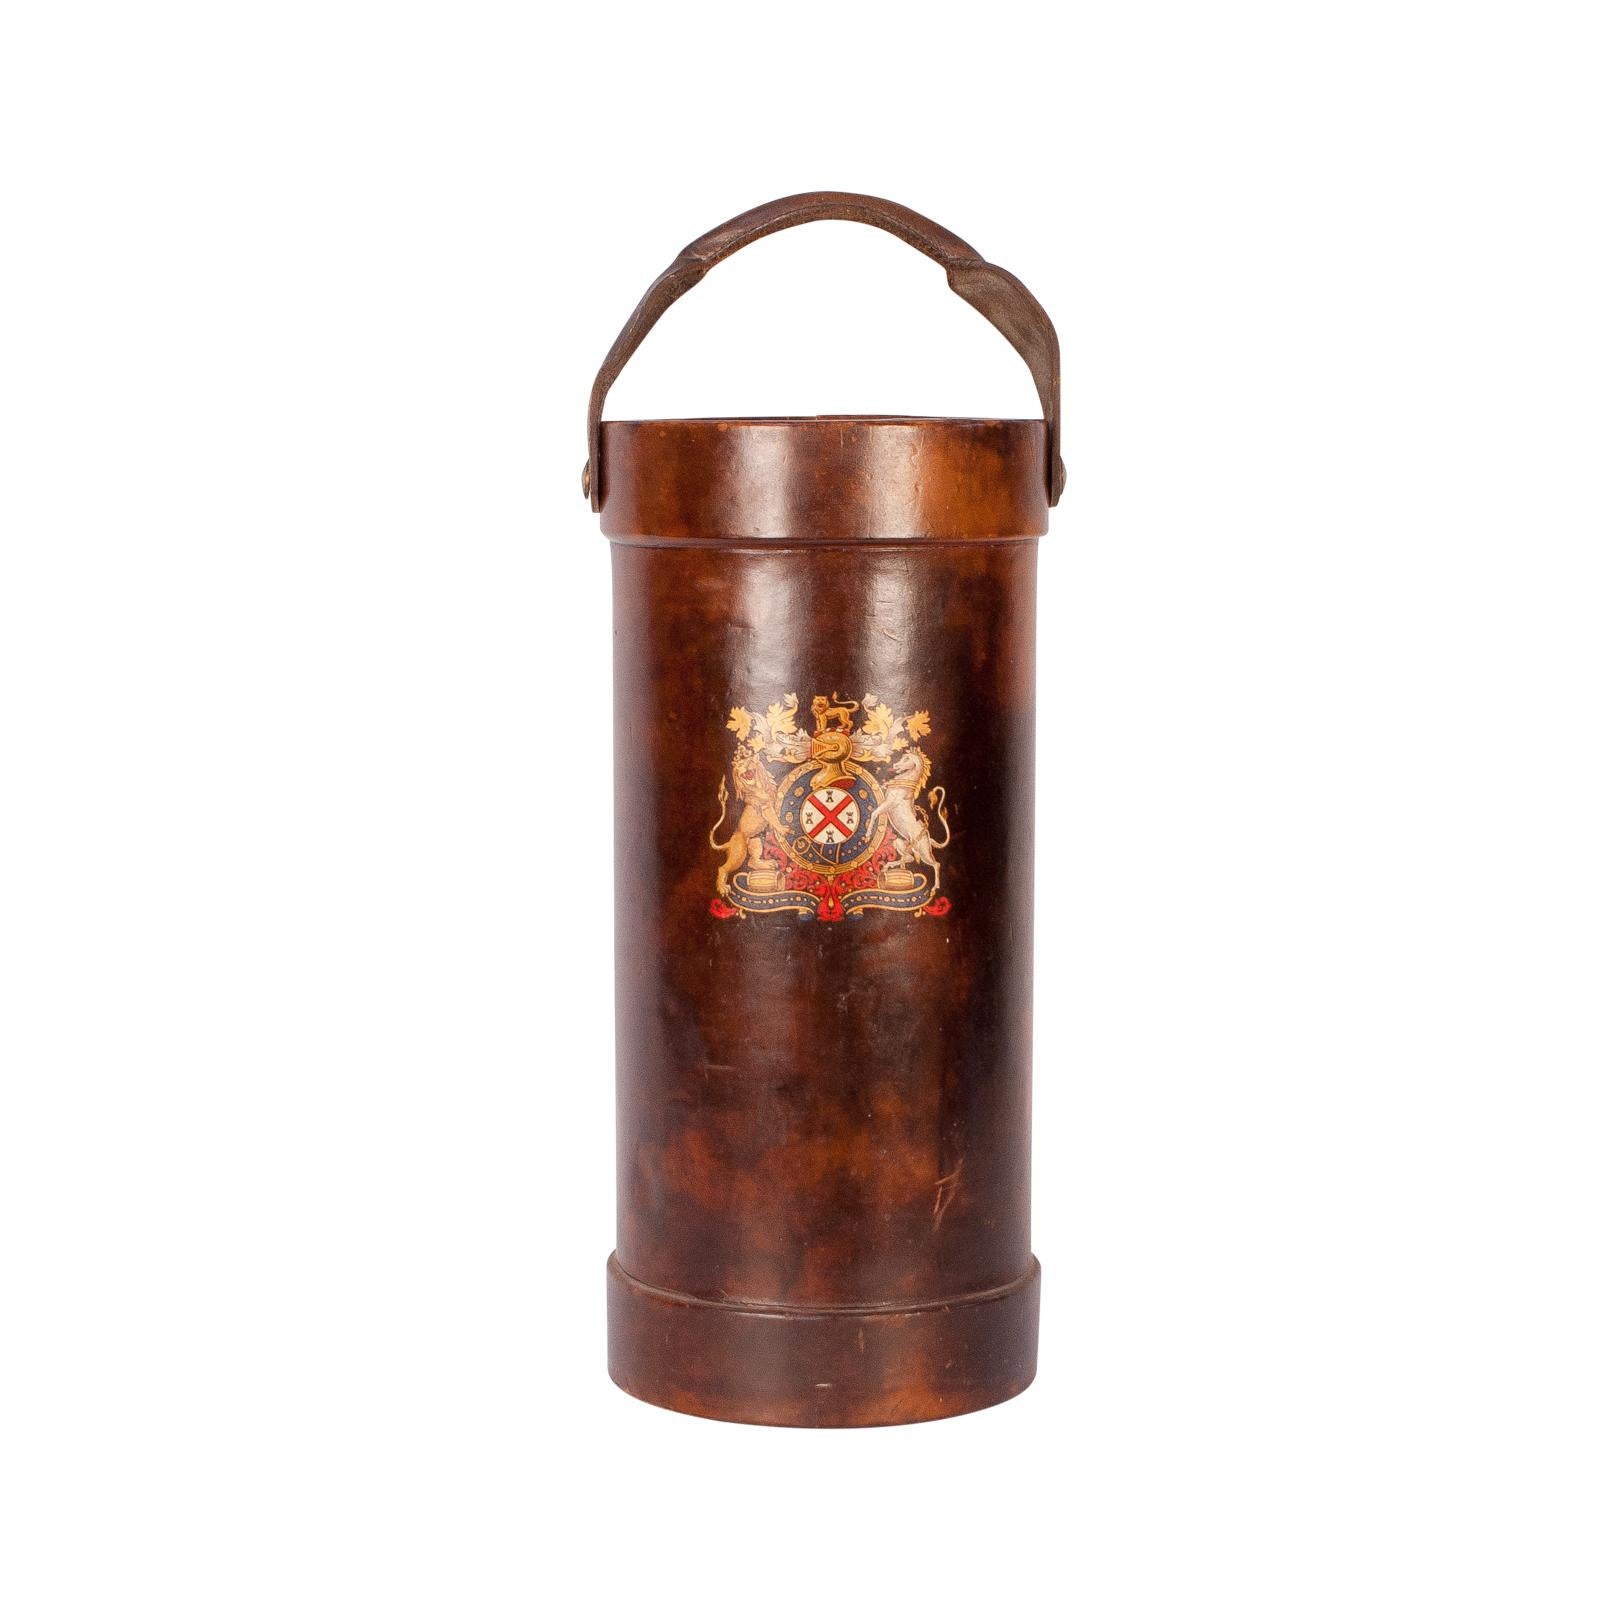 A Vintage English leather document holder with a decorative armorial on leather, circa 1950. This is made in the Georgian English style and is great as an umbrella stand or a dry trash can.